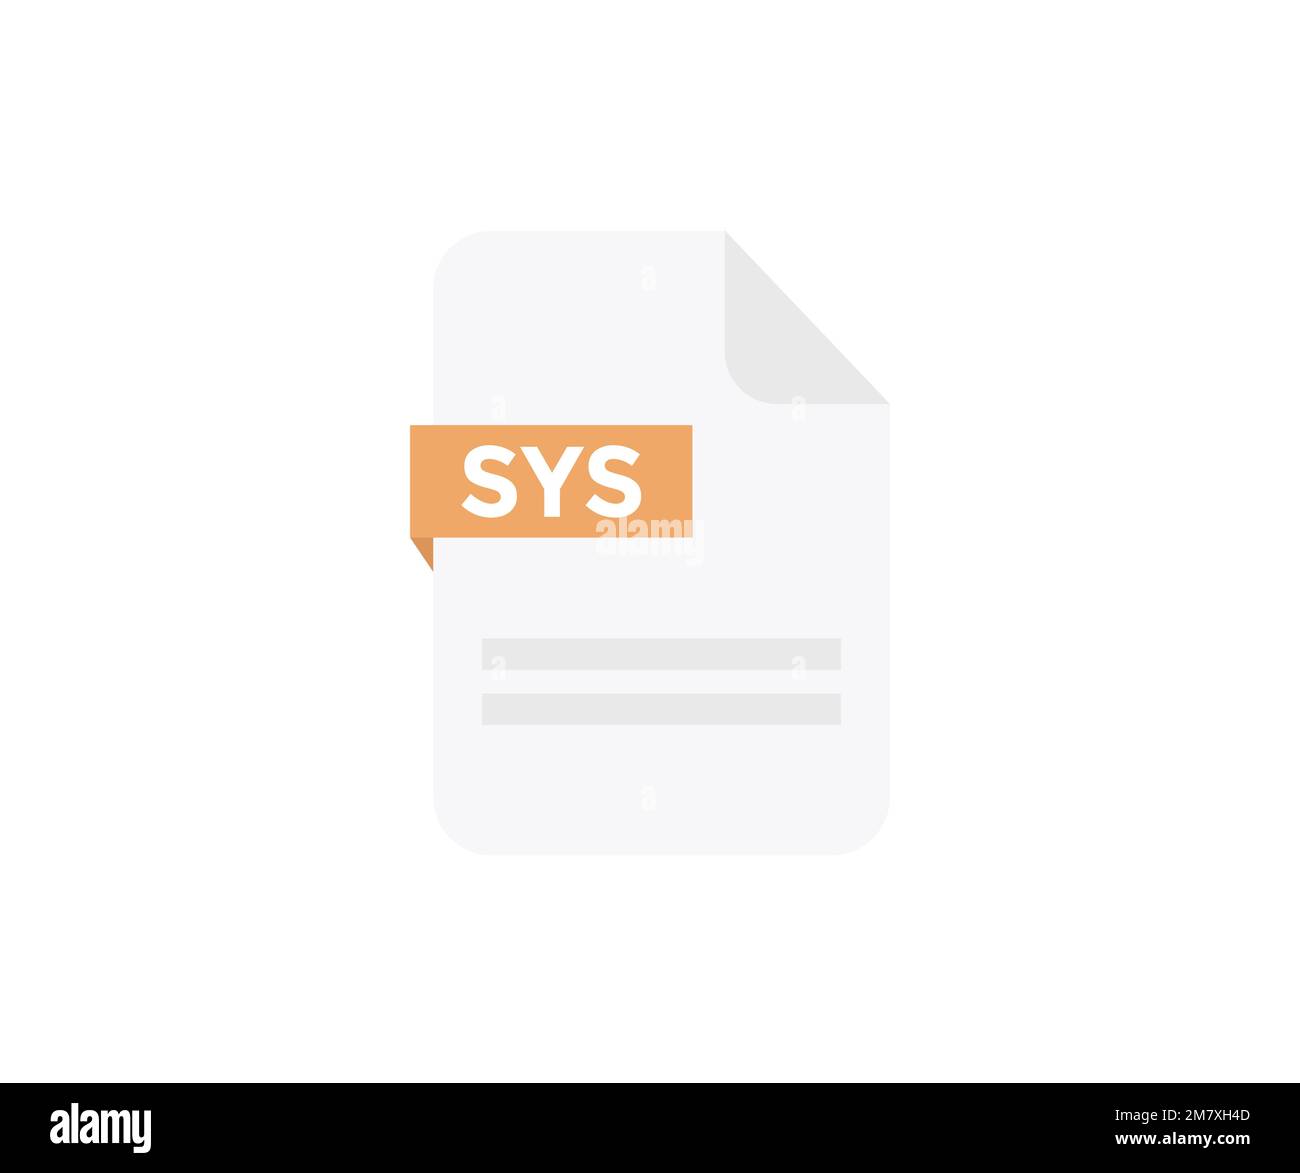 File format SYS logo design. Document file icon, internet, extension, sign, type, presentation, graphic, application. Element for applications. Stock Vector